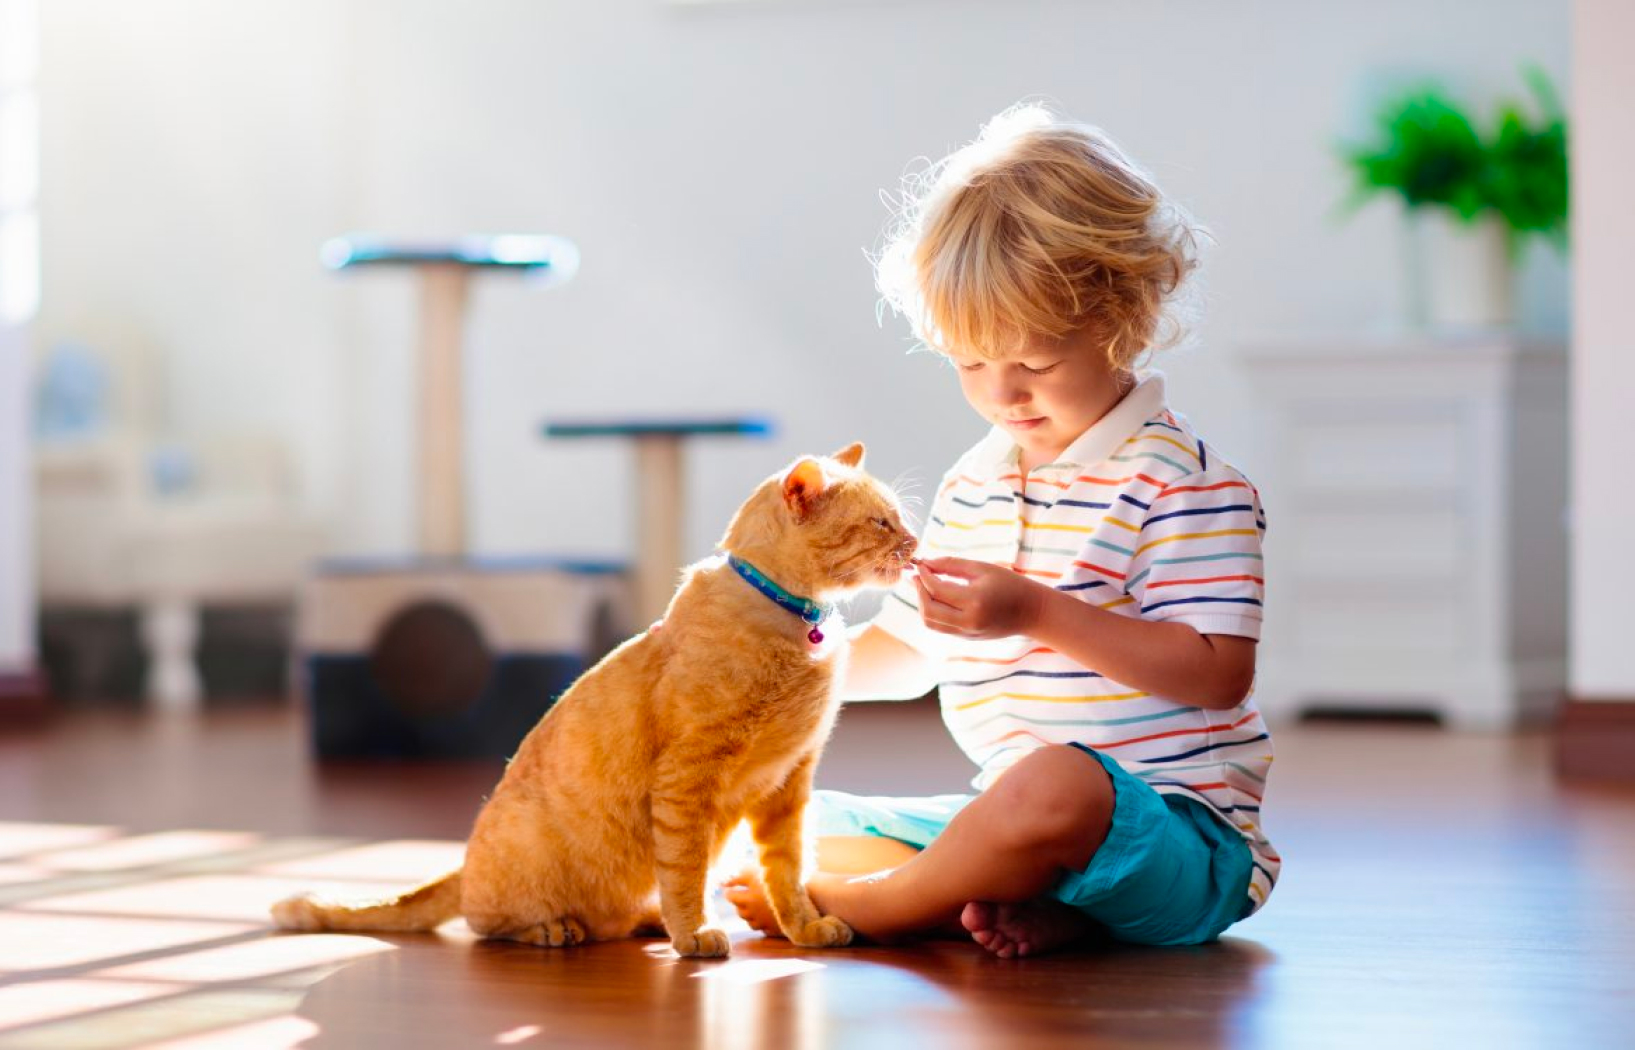 This course gives kids the superpower of helping their parents help their furry family members.